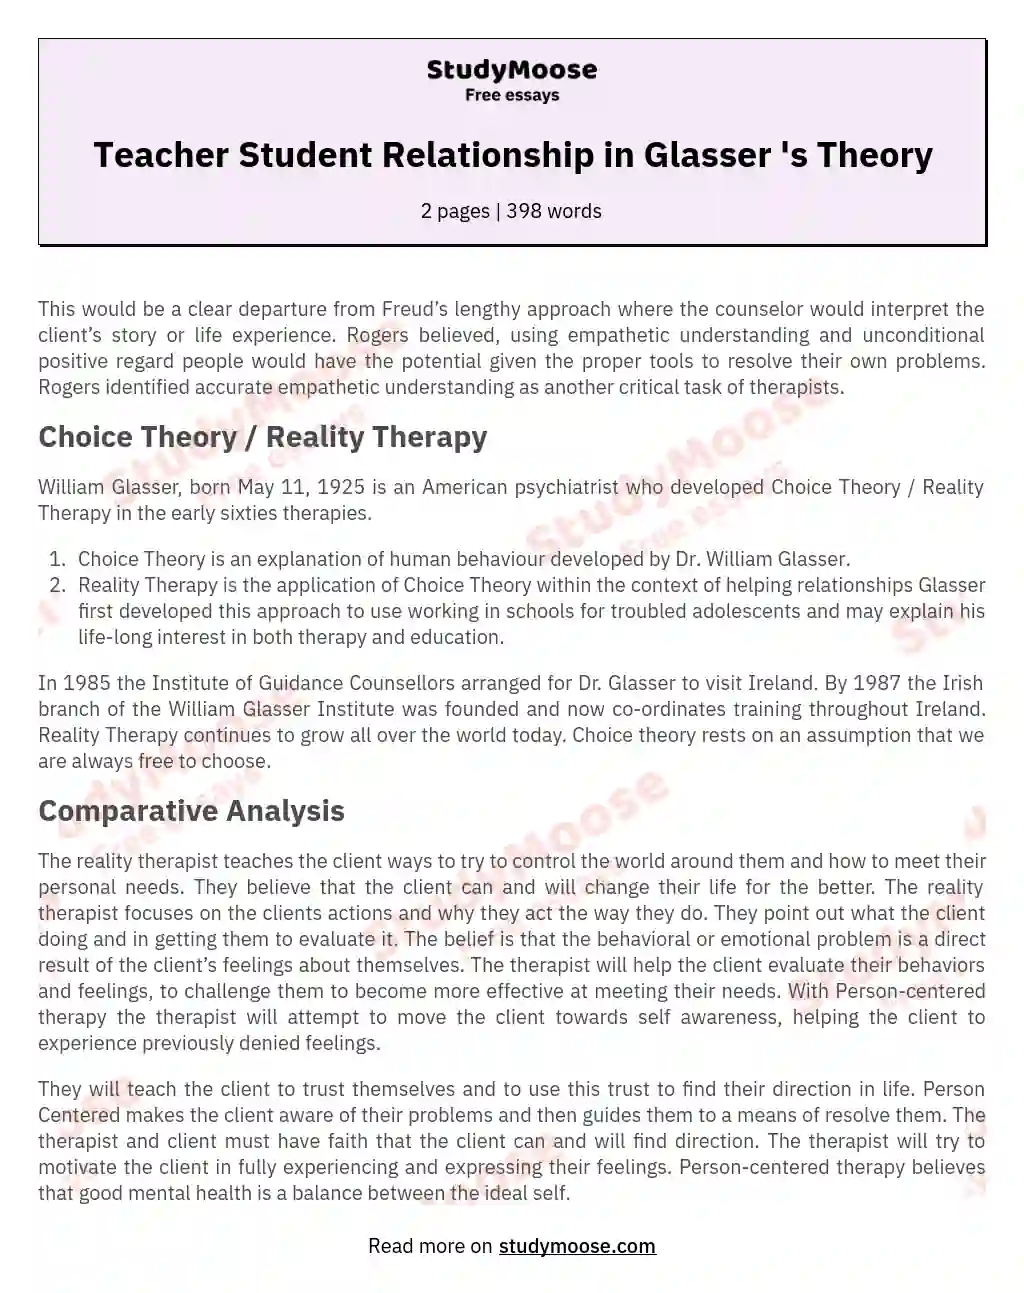 Teacher Student Relationship in Glasser 's Theory essay